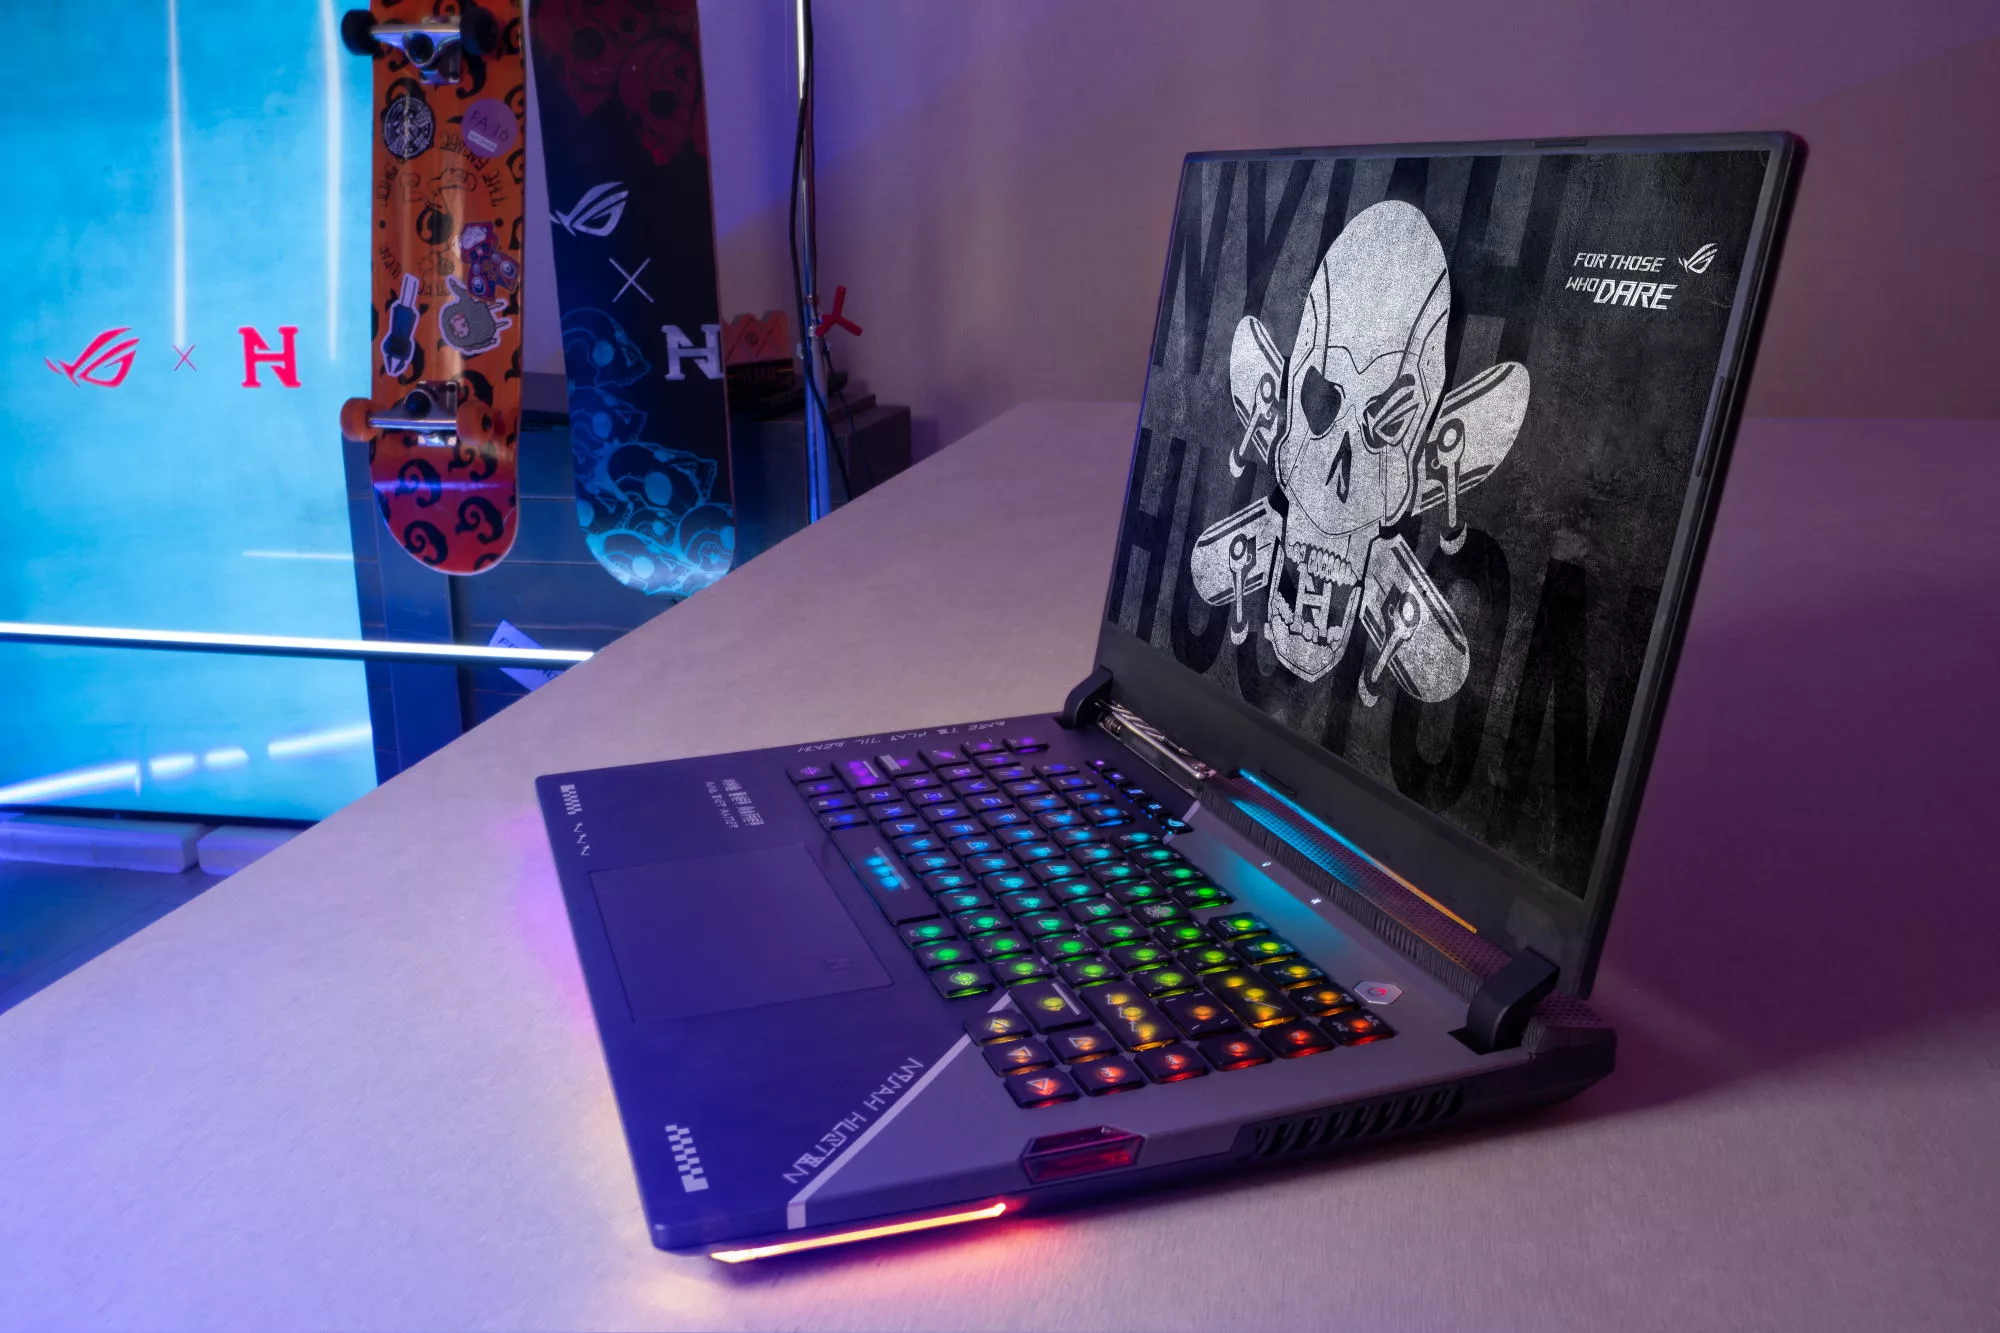 The custom laptop is featured, with emphasis on the custom keyboard deck and accents.